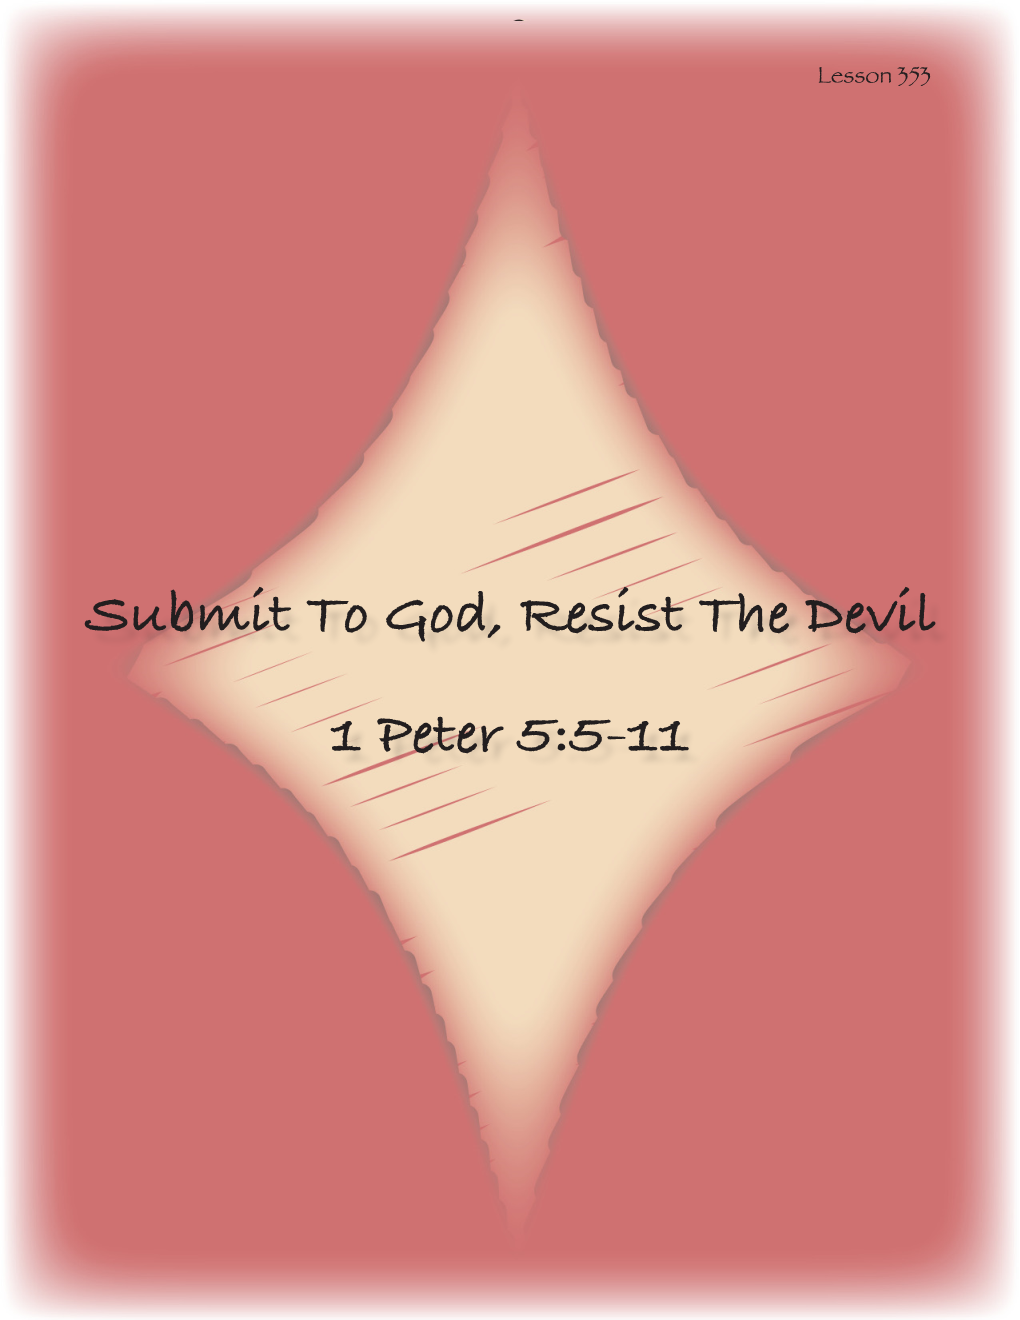 Submit to God, Resist the Devil 1 Peter 5:5-11